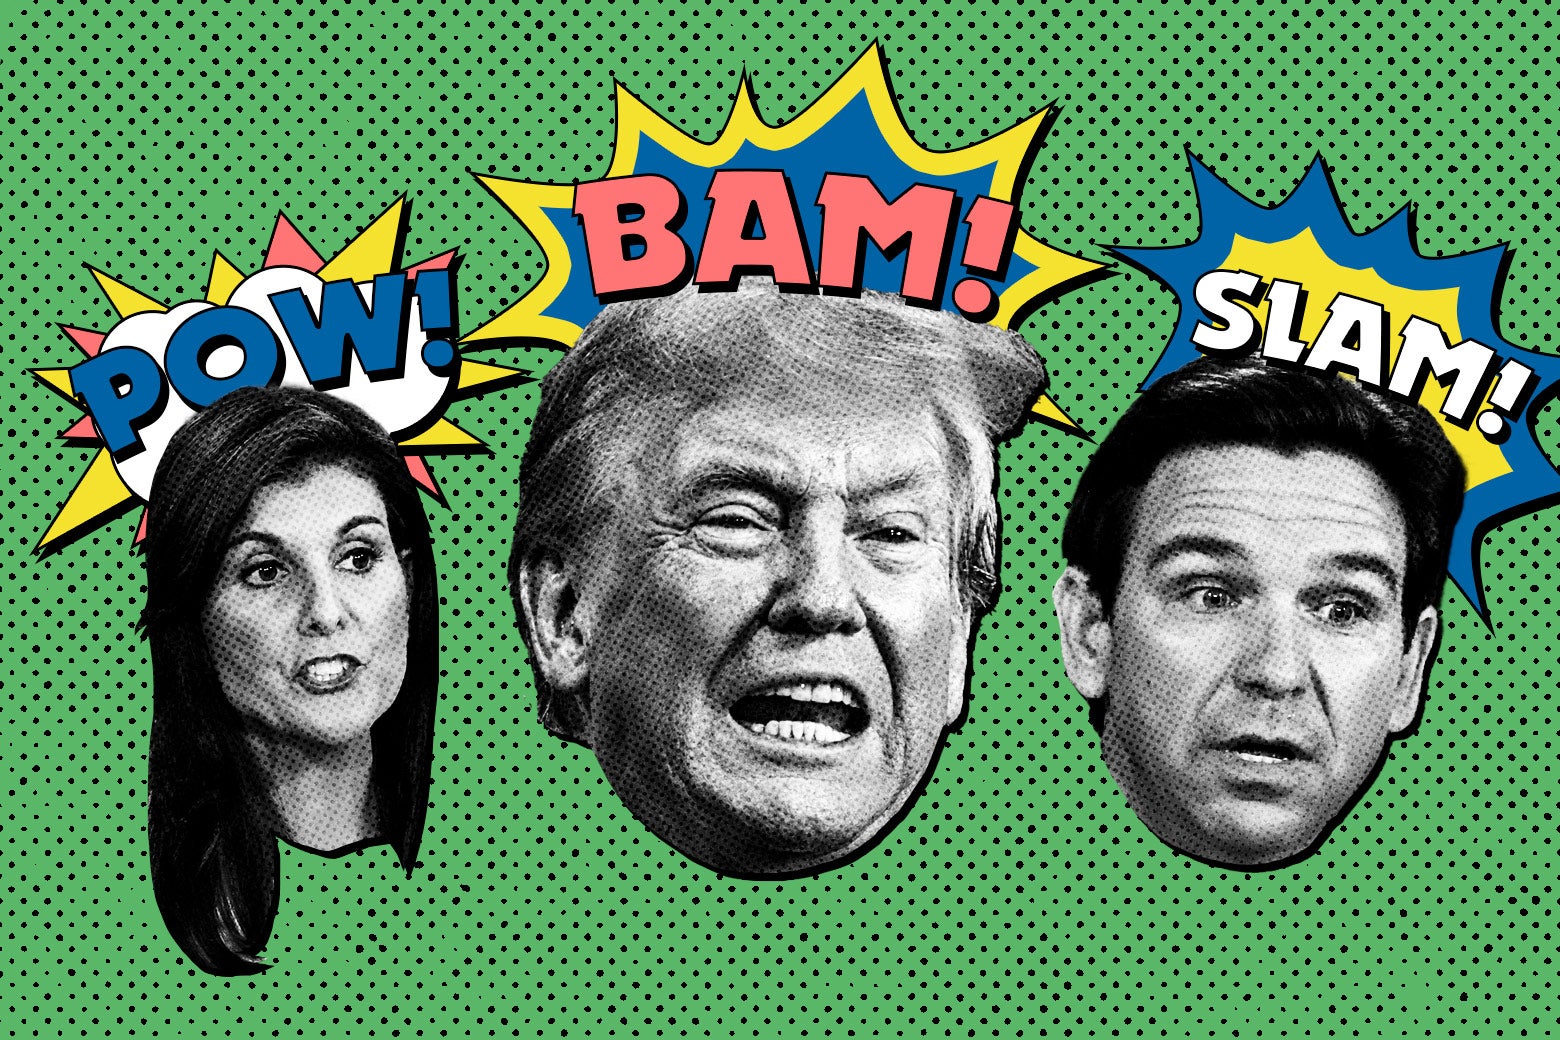 Nikki Haley, Donald Trump, and Ron DeSantis styled like comic book characters, with sound effect balloons over their heads (POW! BAM! SLAM!)